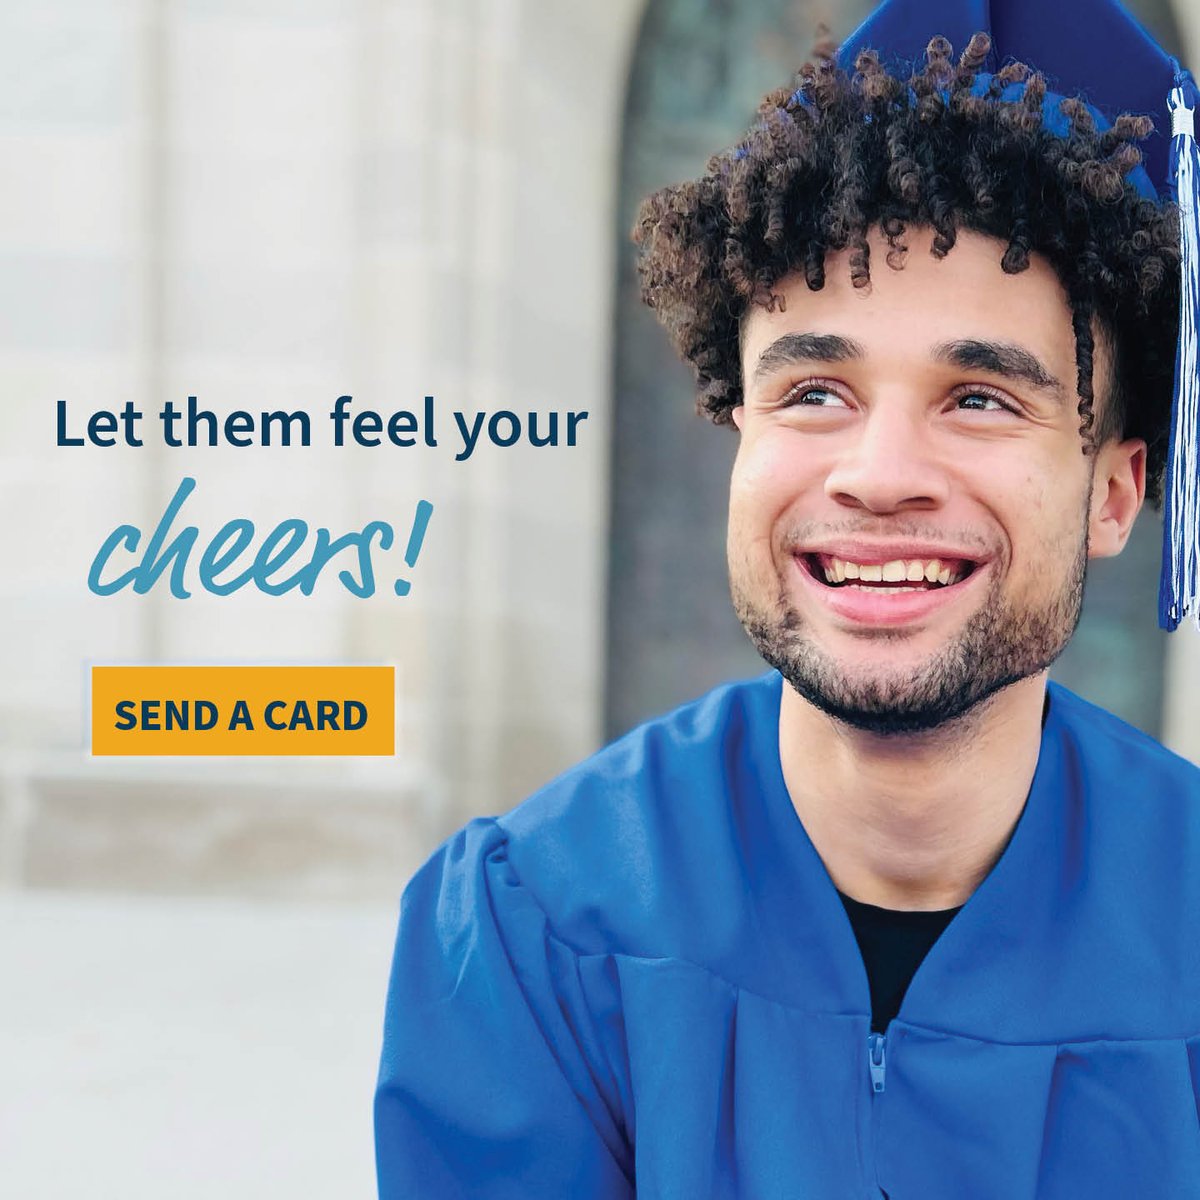 They've overcome more than most of us can imagine. Now, it's time to celebrate their success! Don’t miss your chance to wish our graduating students well. Send a personal note of cheer today: bit.ly/3Wa9jRJ